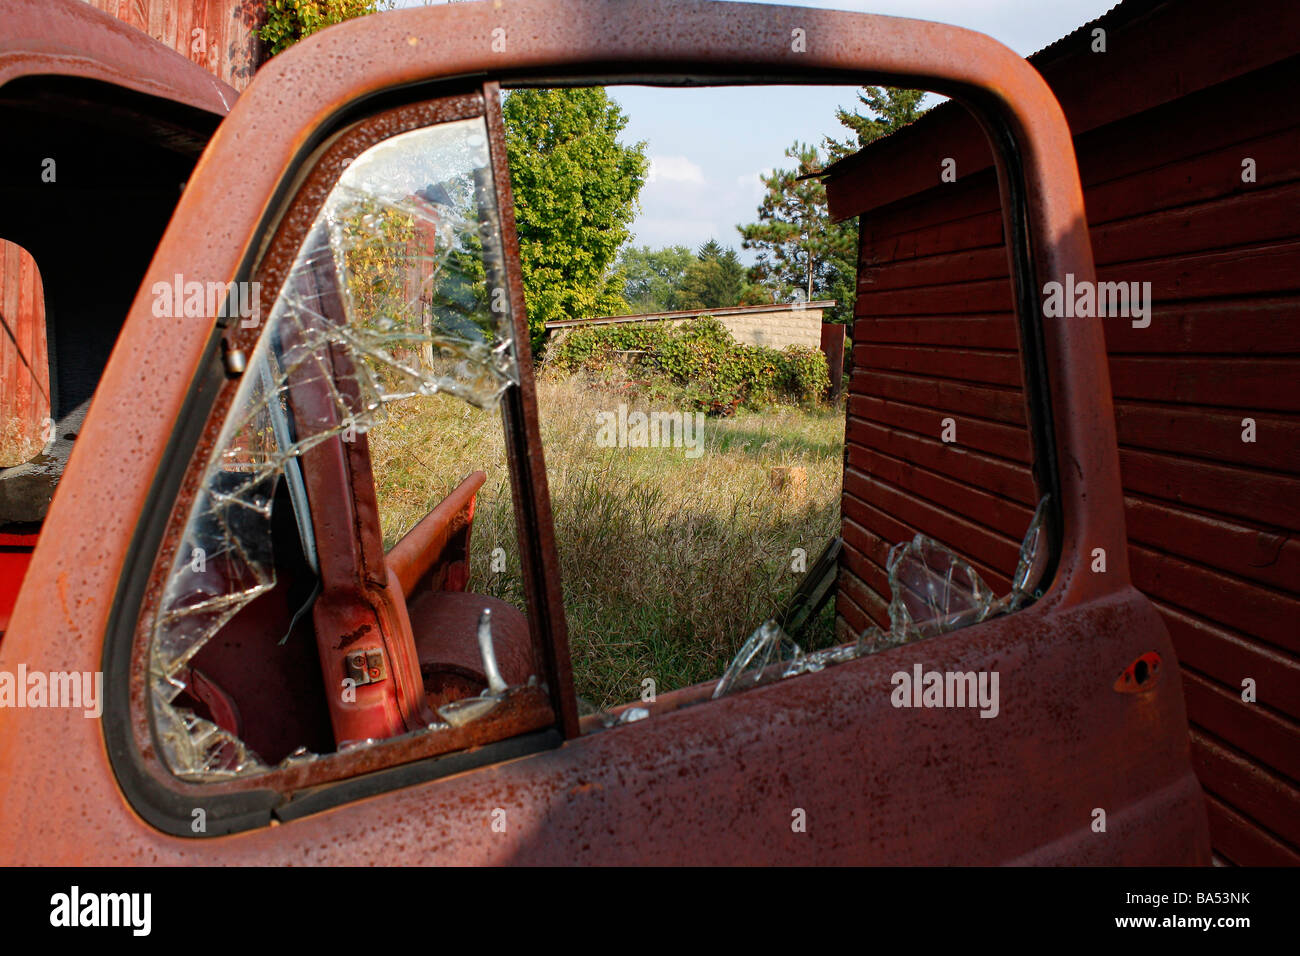 Abandoned a rusty old red car in open rusty antique car in the field with wooden barn Michigan USA old vintage fashioned wallpapers wallpaper hi-res Stock Photo